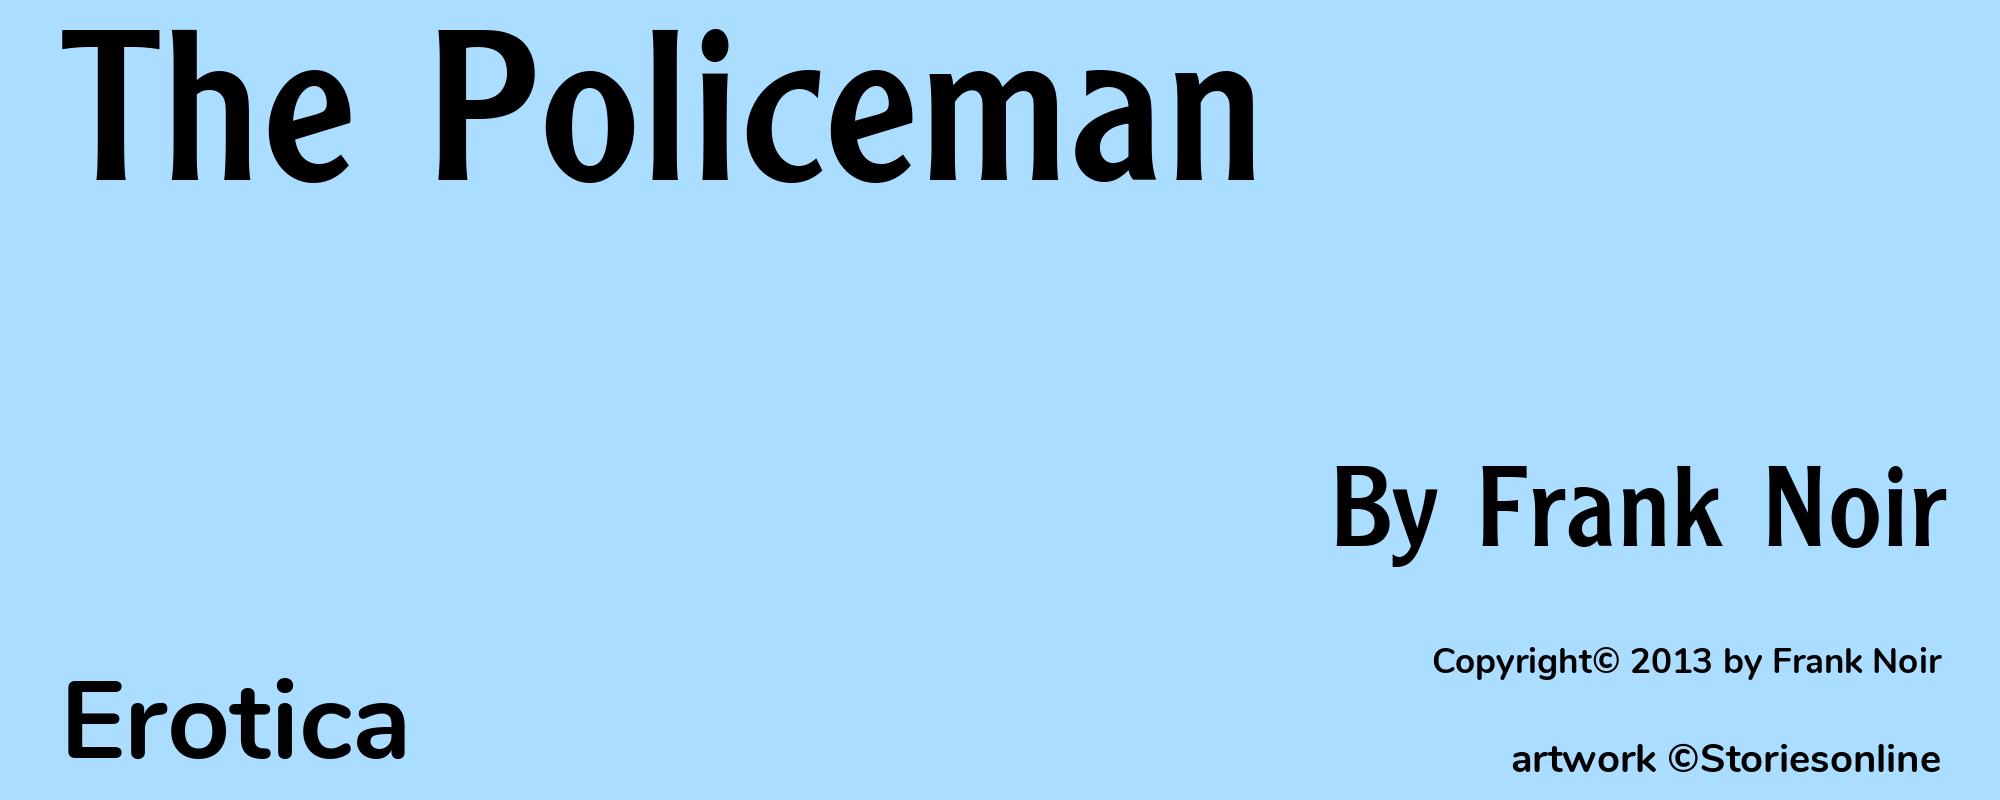 The Policeman - Cover